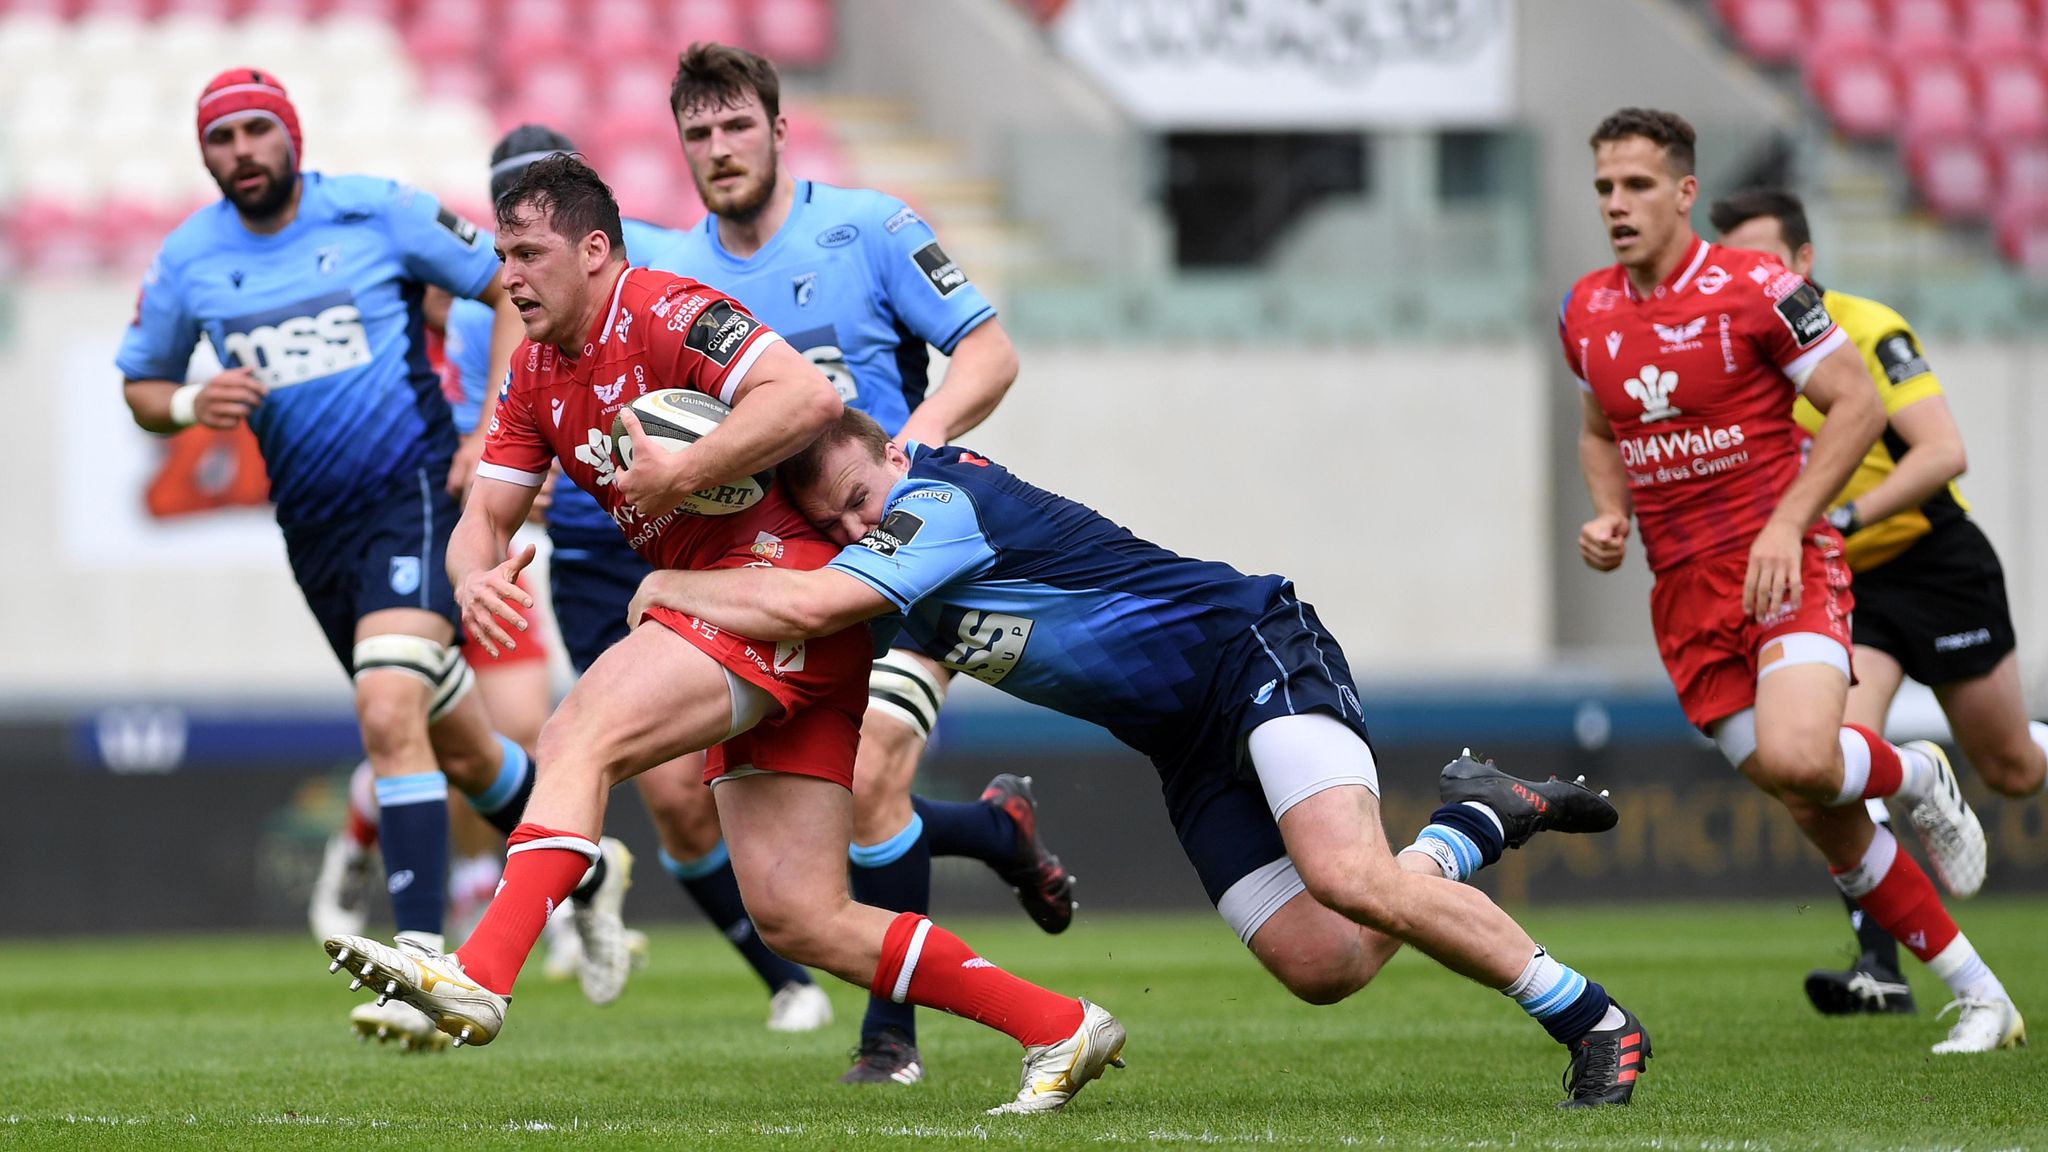 Cardiff Blues vs Scarlets United Rugby Championship Boxing Day game off because of Covid-19 outbreak Rugby Union News Sky Sports